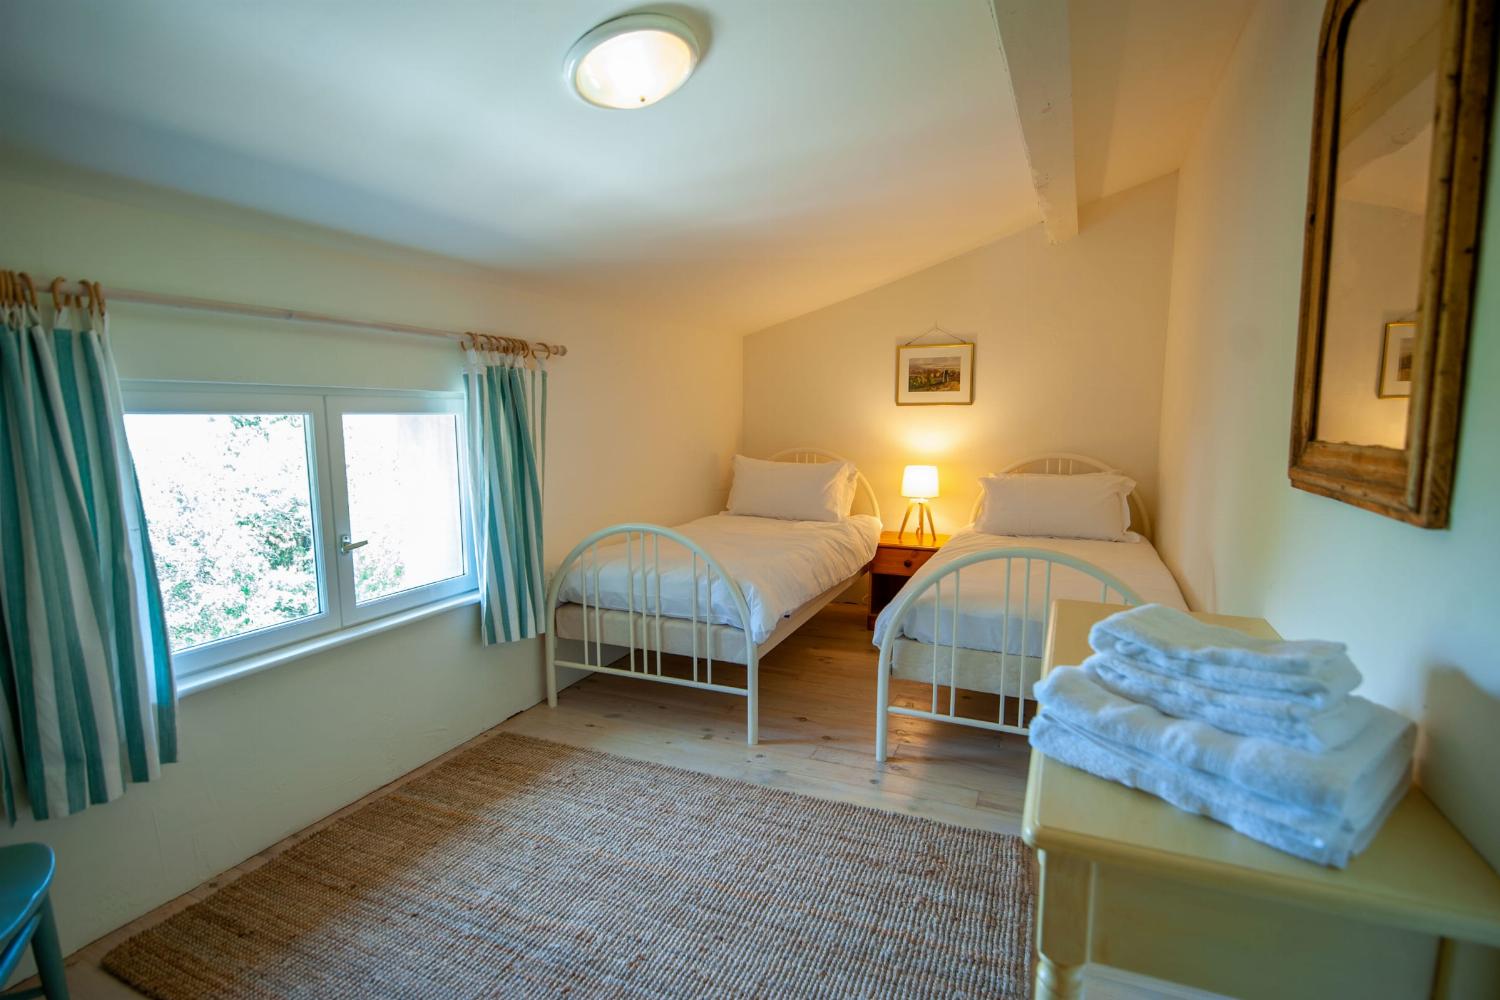 Bedroom | Additional accommodation